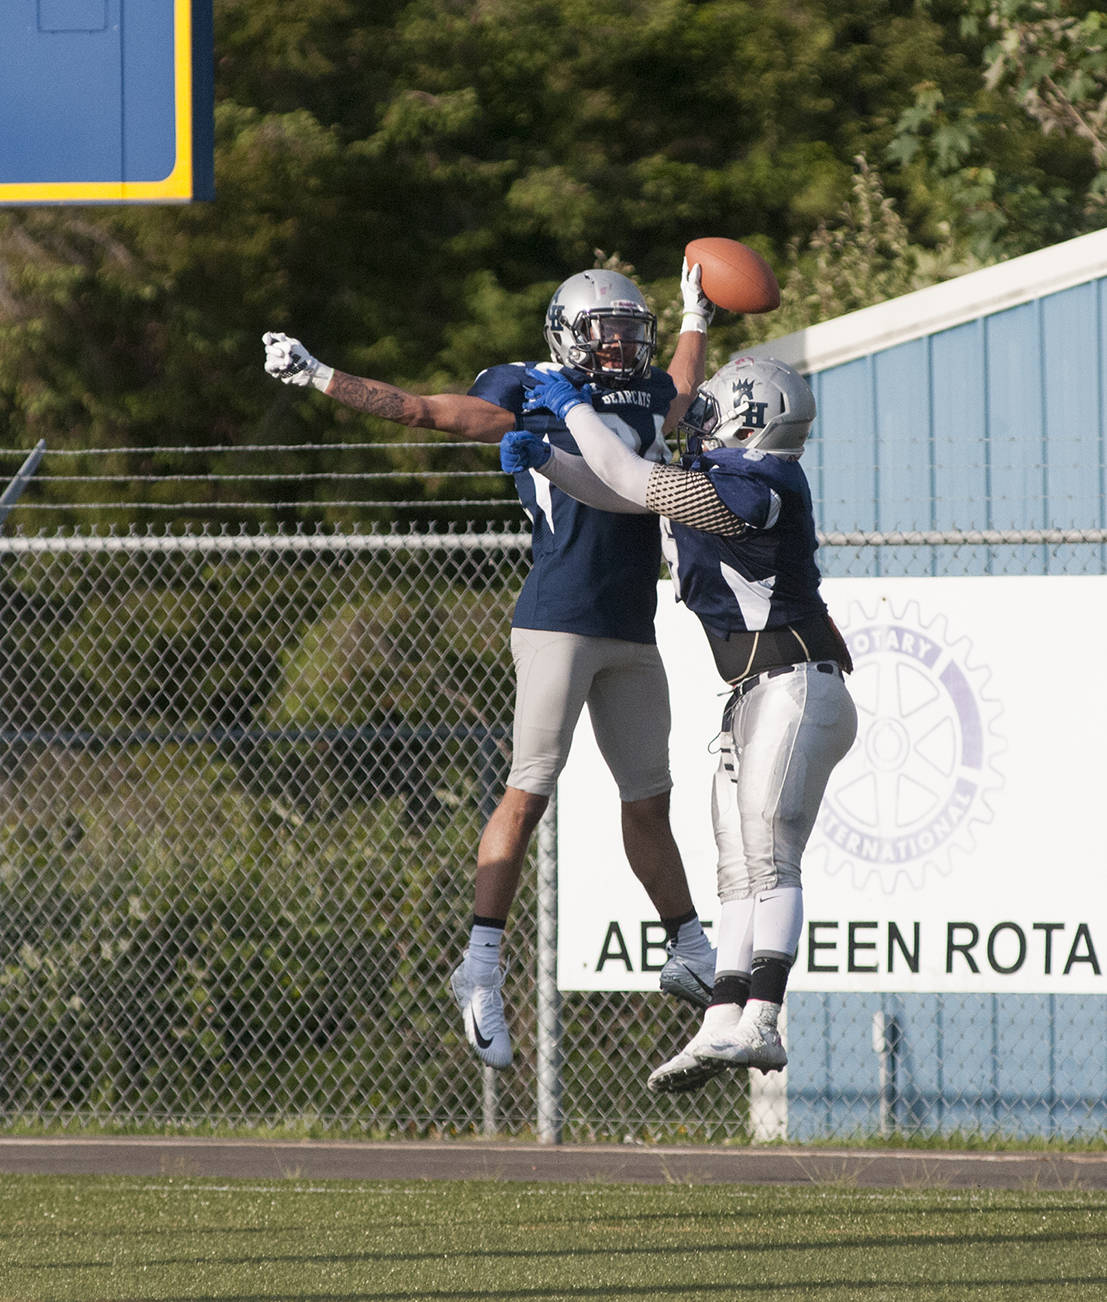 (Brendan Carl | Grays Harbor Newspaper Group) Kareem Johnson, left, and Deeshawn Benjamin celebrate after Johnson picked off a pass for a touchdown on Saturday.